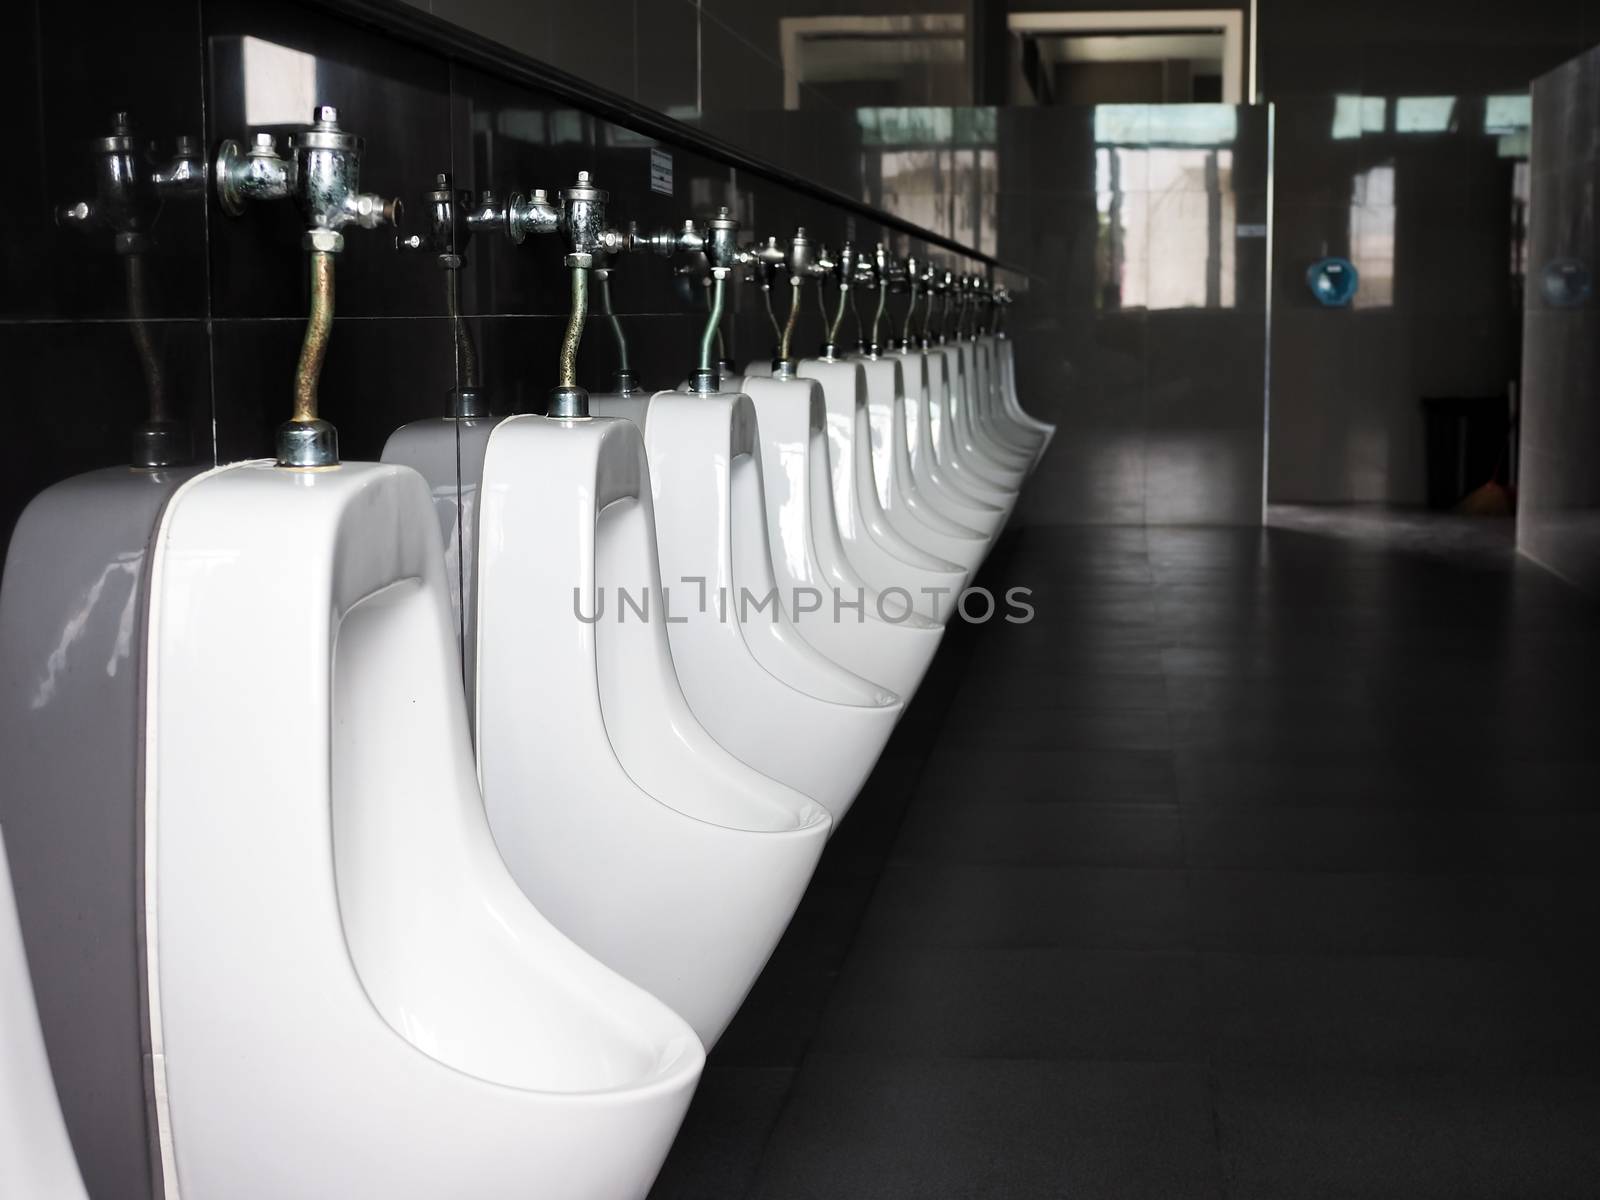 Urinal in public toilets by Unimages2527